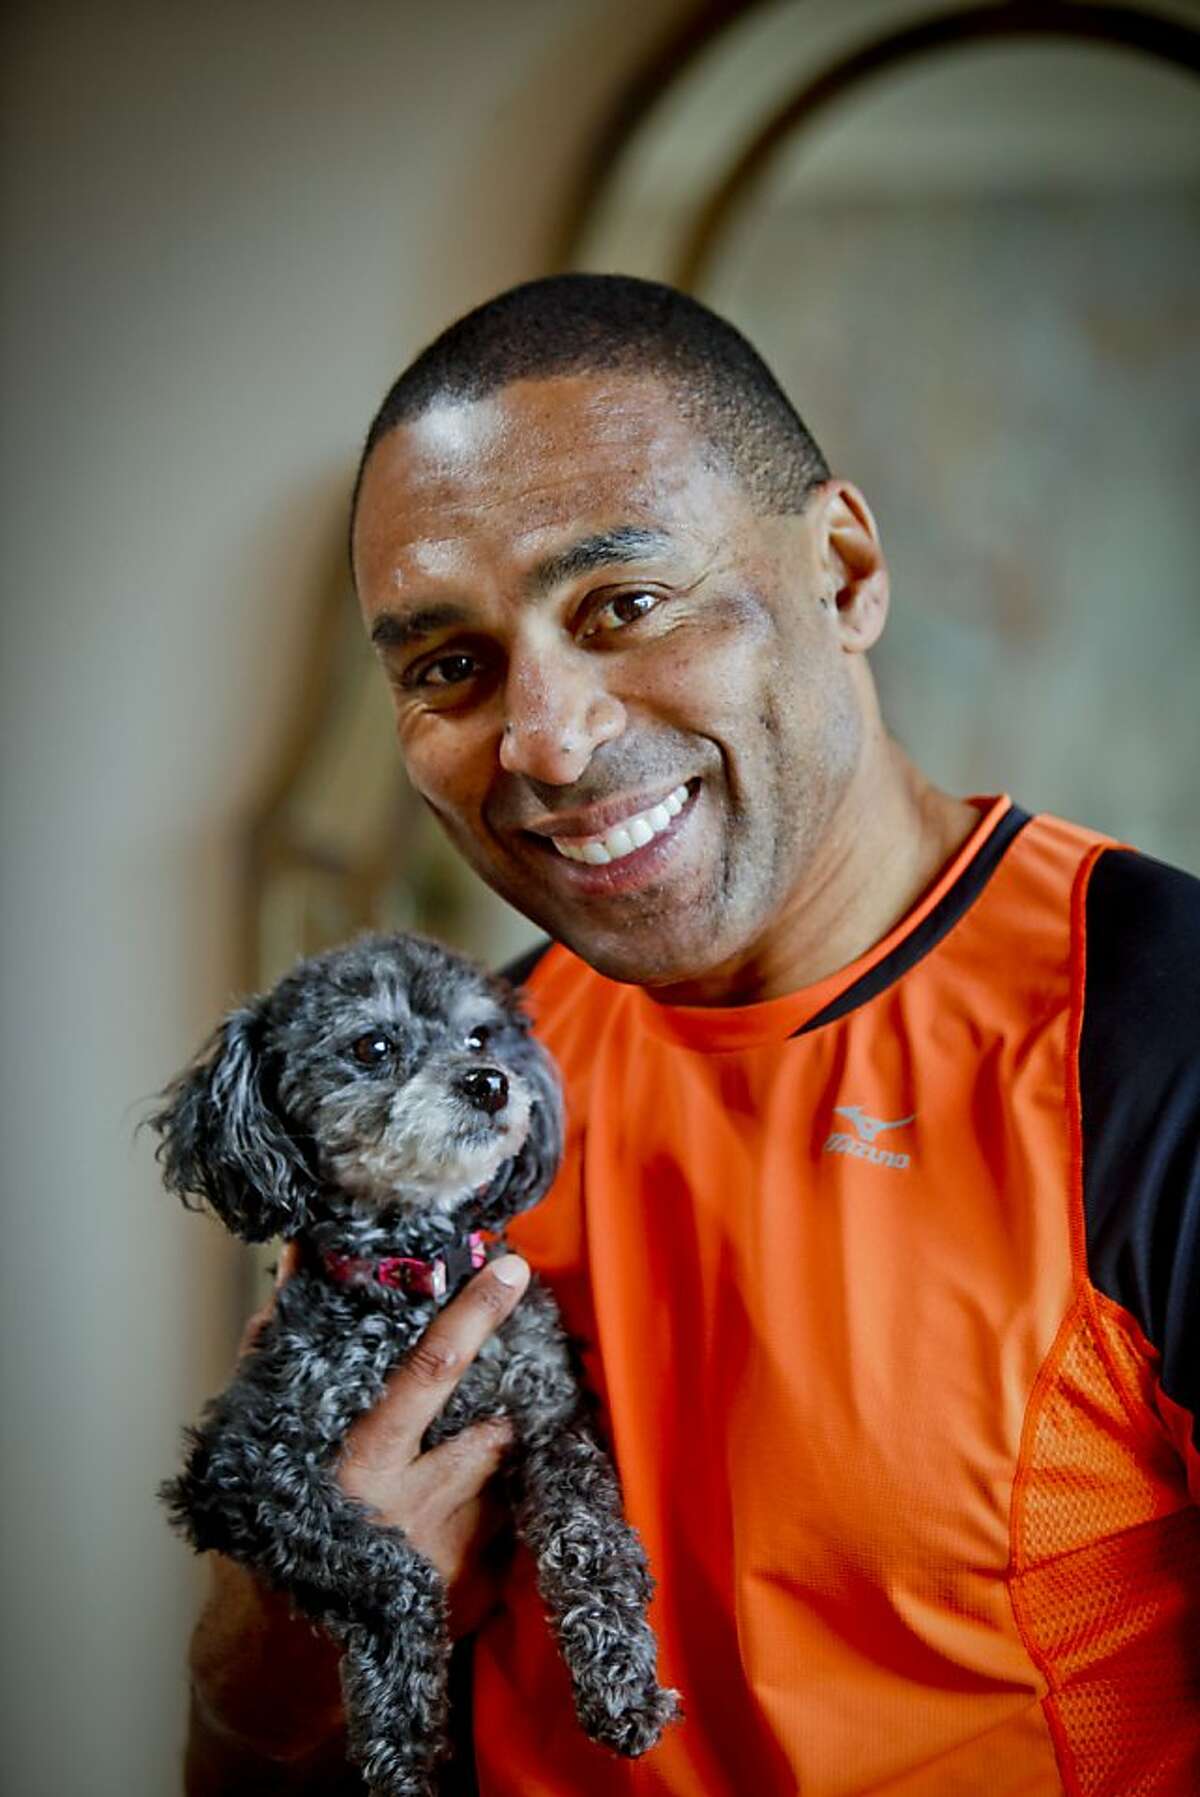 Former San Francisco 49er running back Roger Craig is seen with his dog, Coco, in his Portola Valley home on Friday, May 27, 2011.